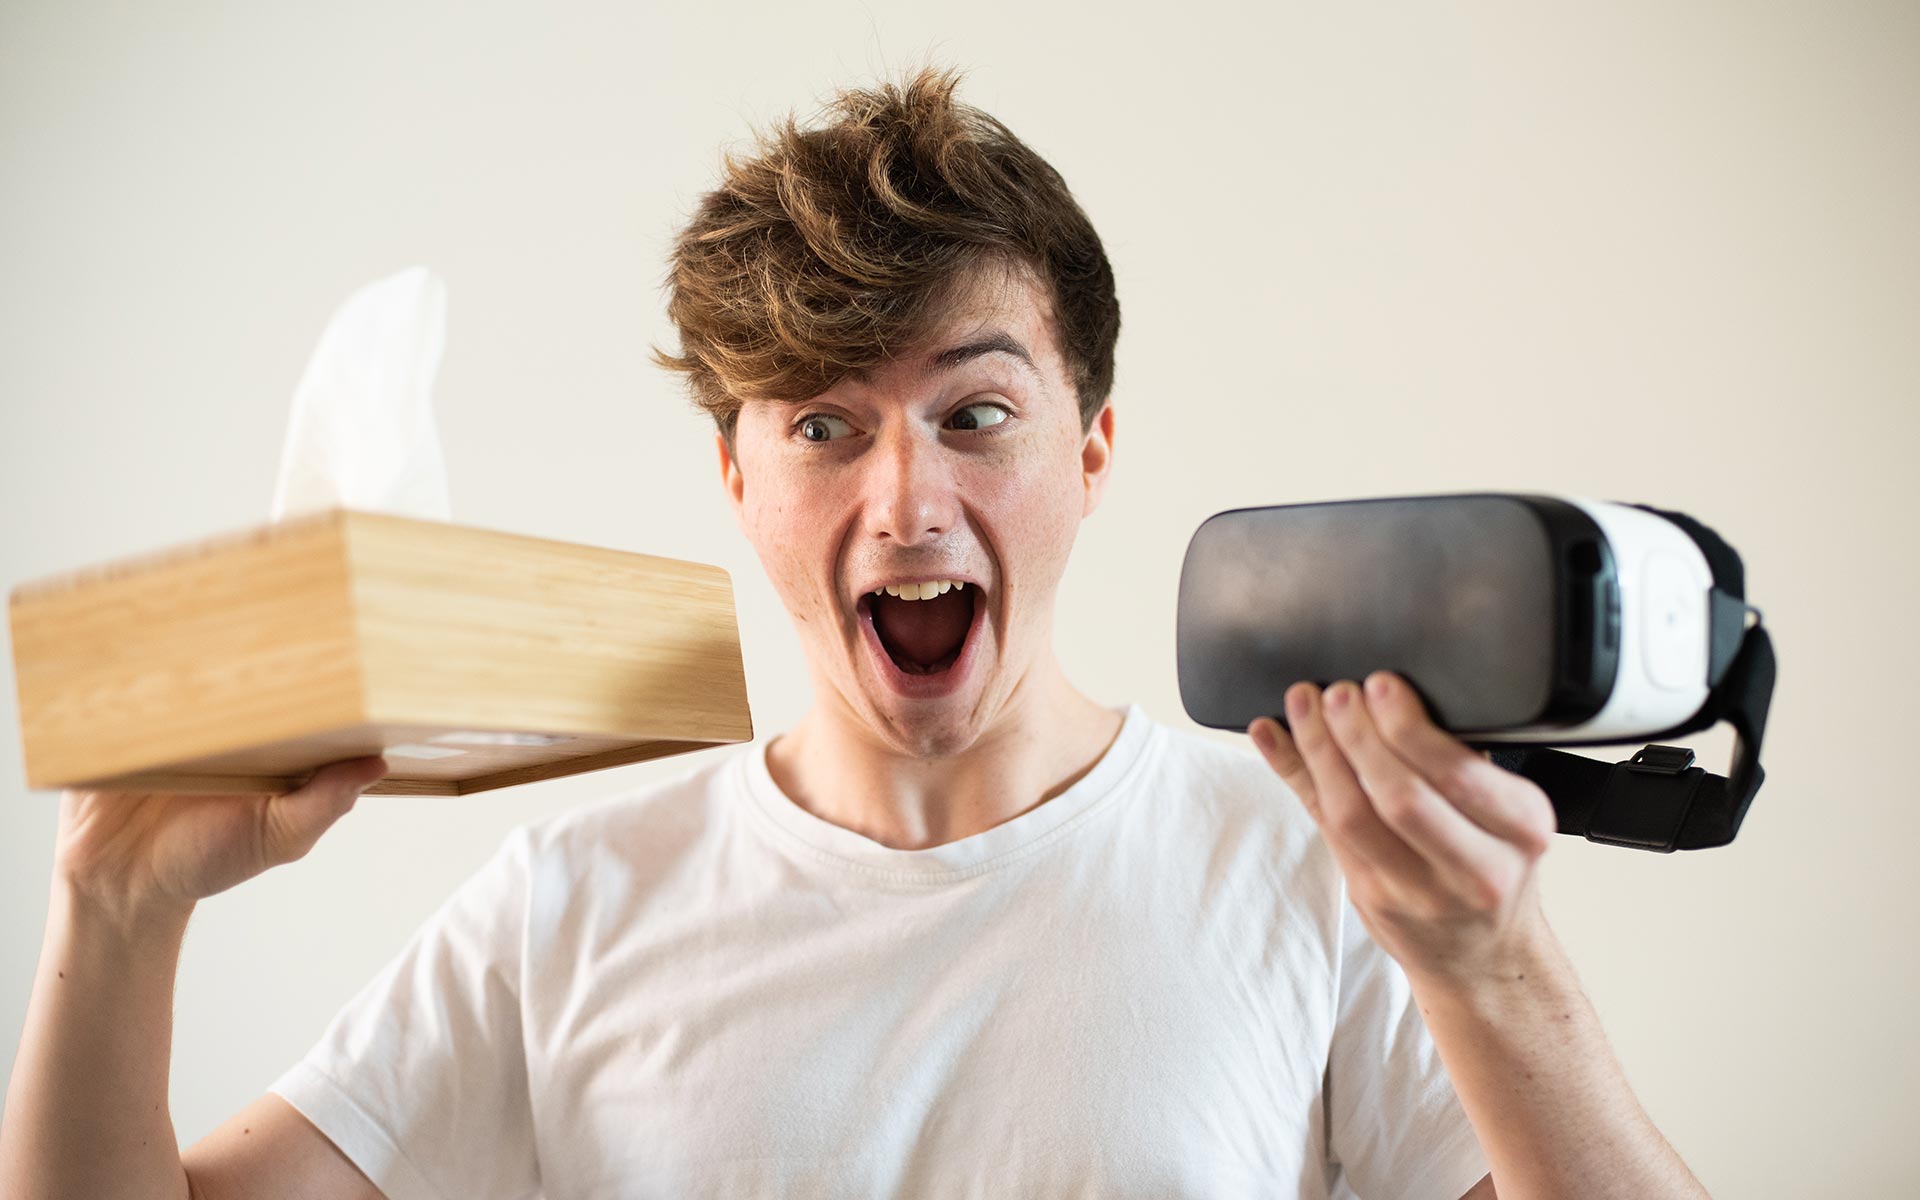 Brunette man in white shirt looking excited, holding a VR headset on one hand and a box of tissues on the other.